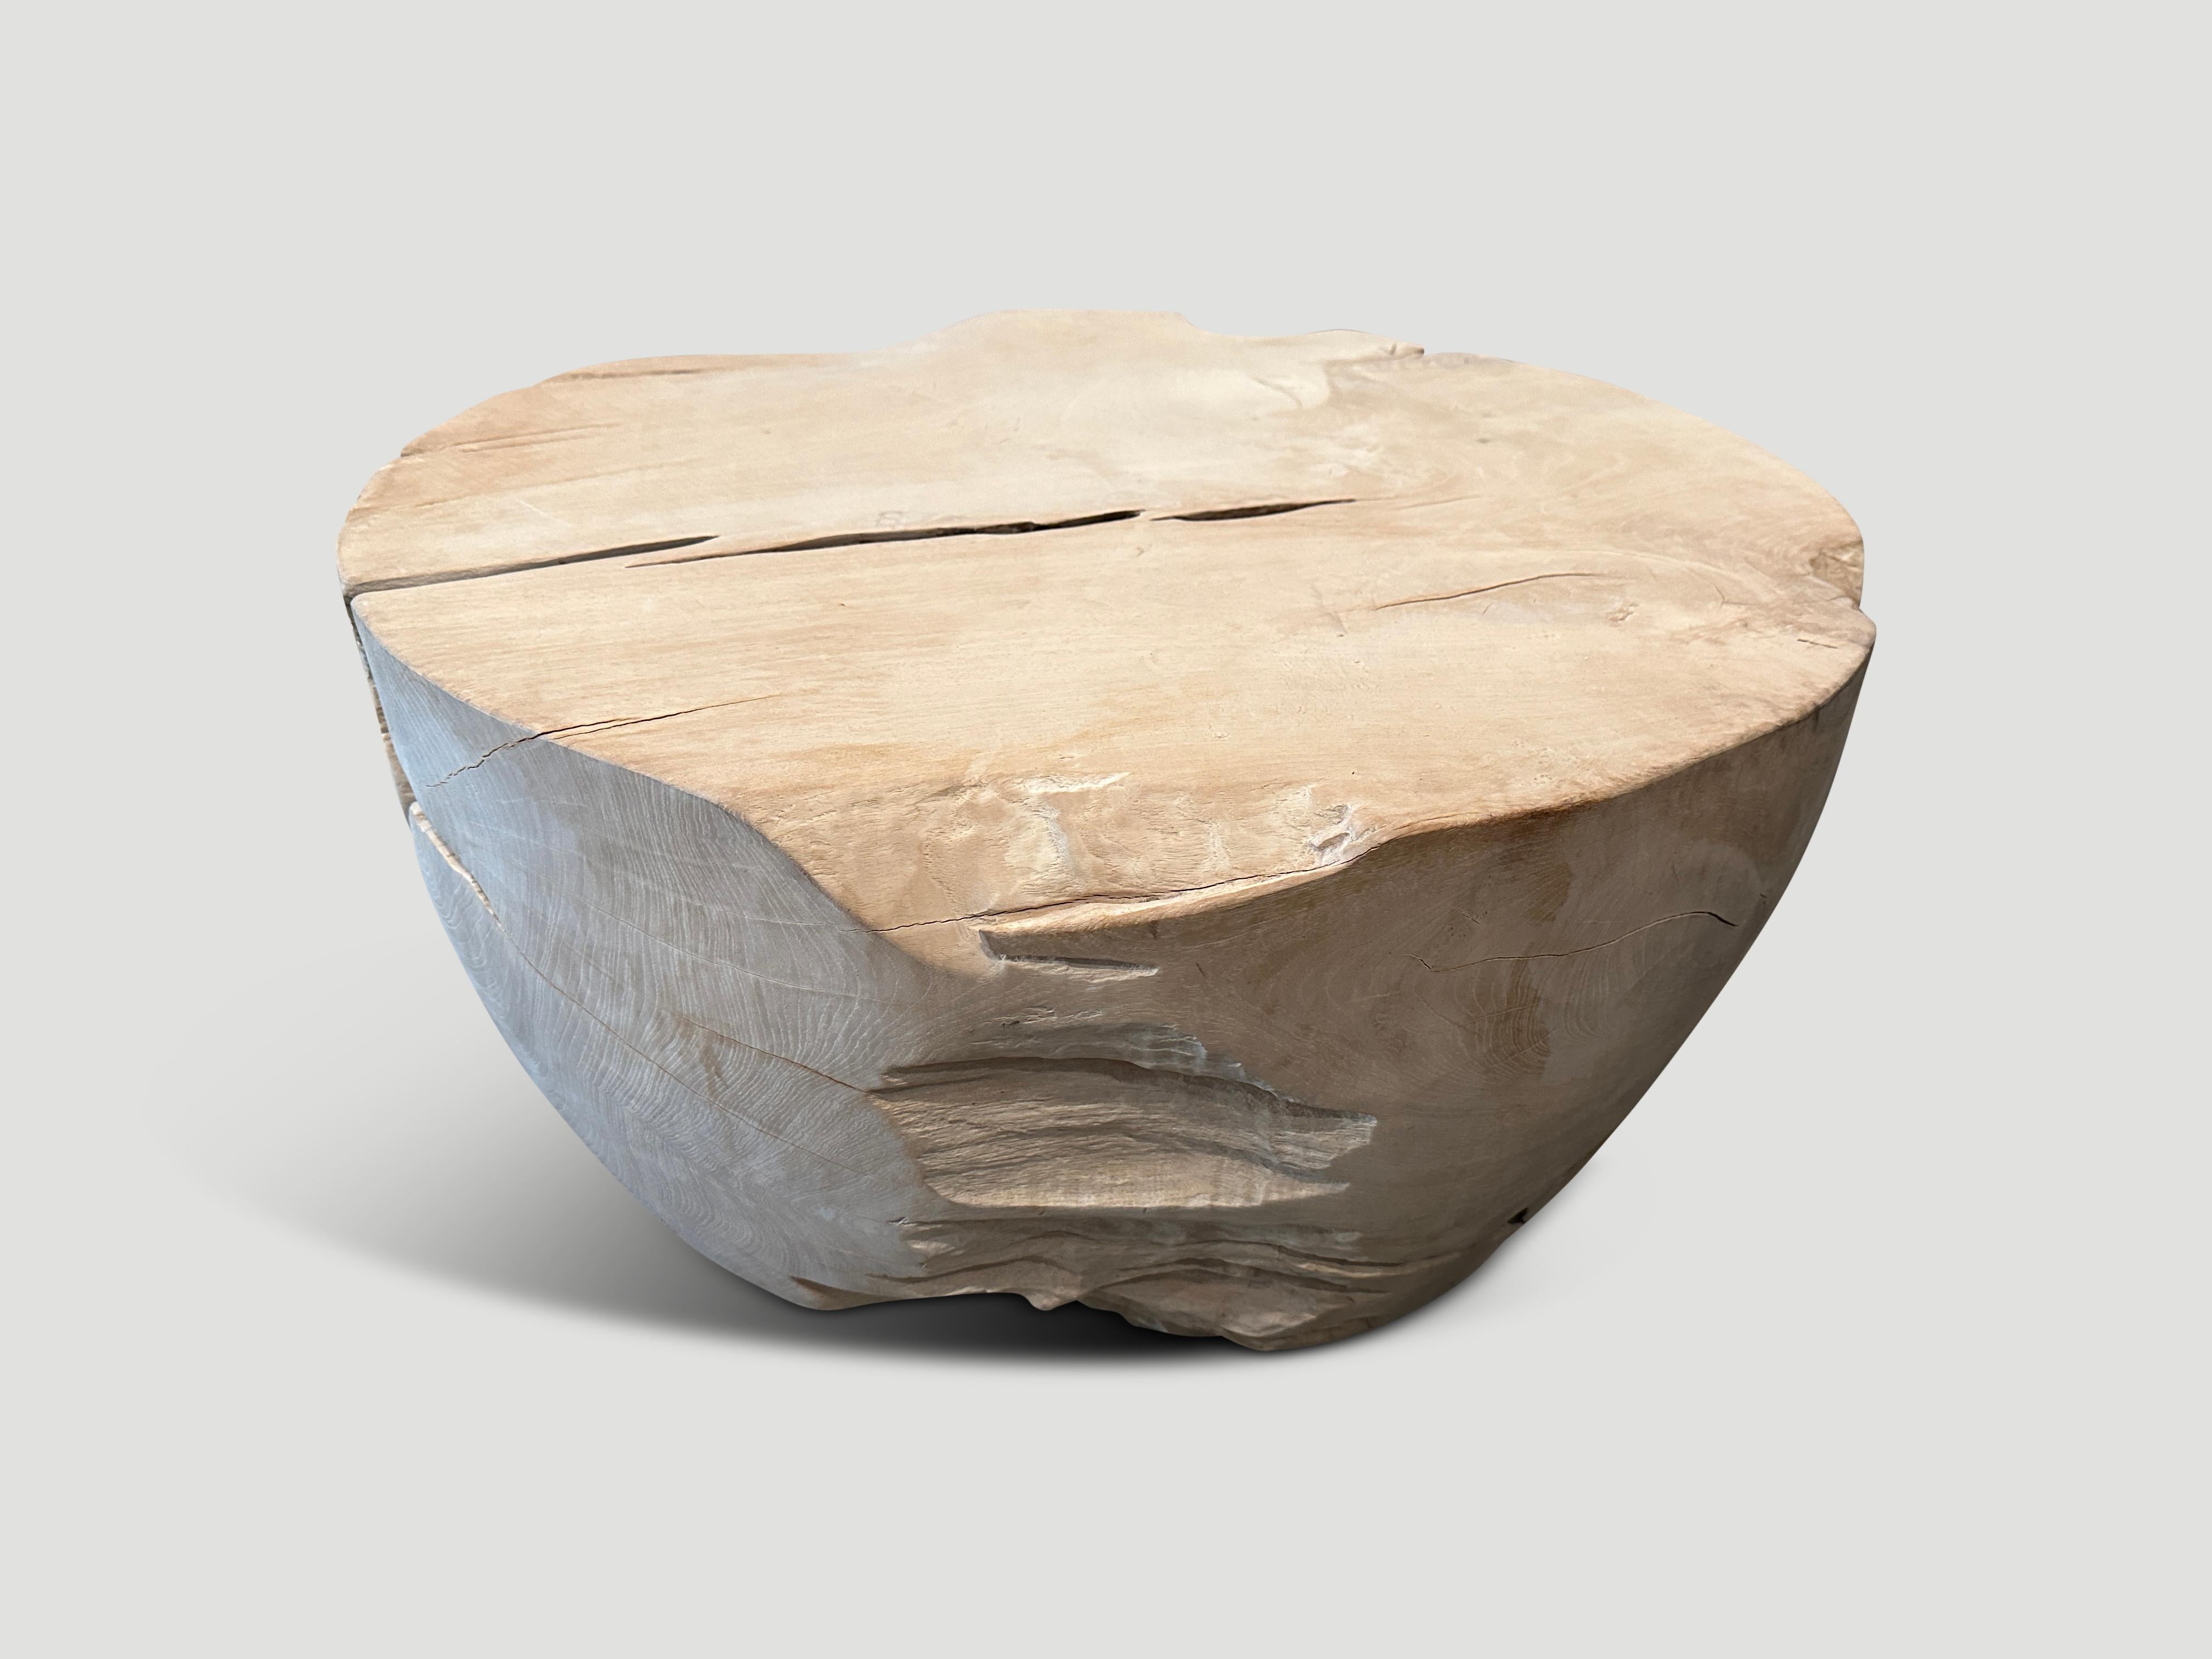 Reclaimed teak root coffee table hand carved into a drum shape whilst respecting the natural organic wood. We added a light white wash revealing the beautiful wood grain. Both usable and sculptural.

The St. Barts Collection features an exciting